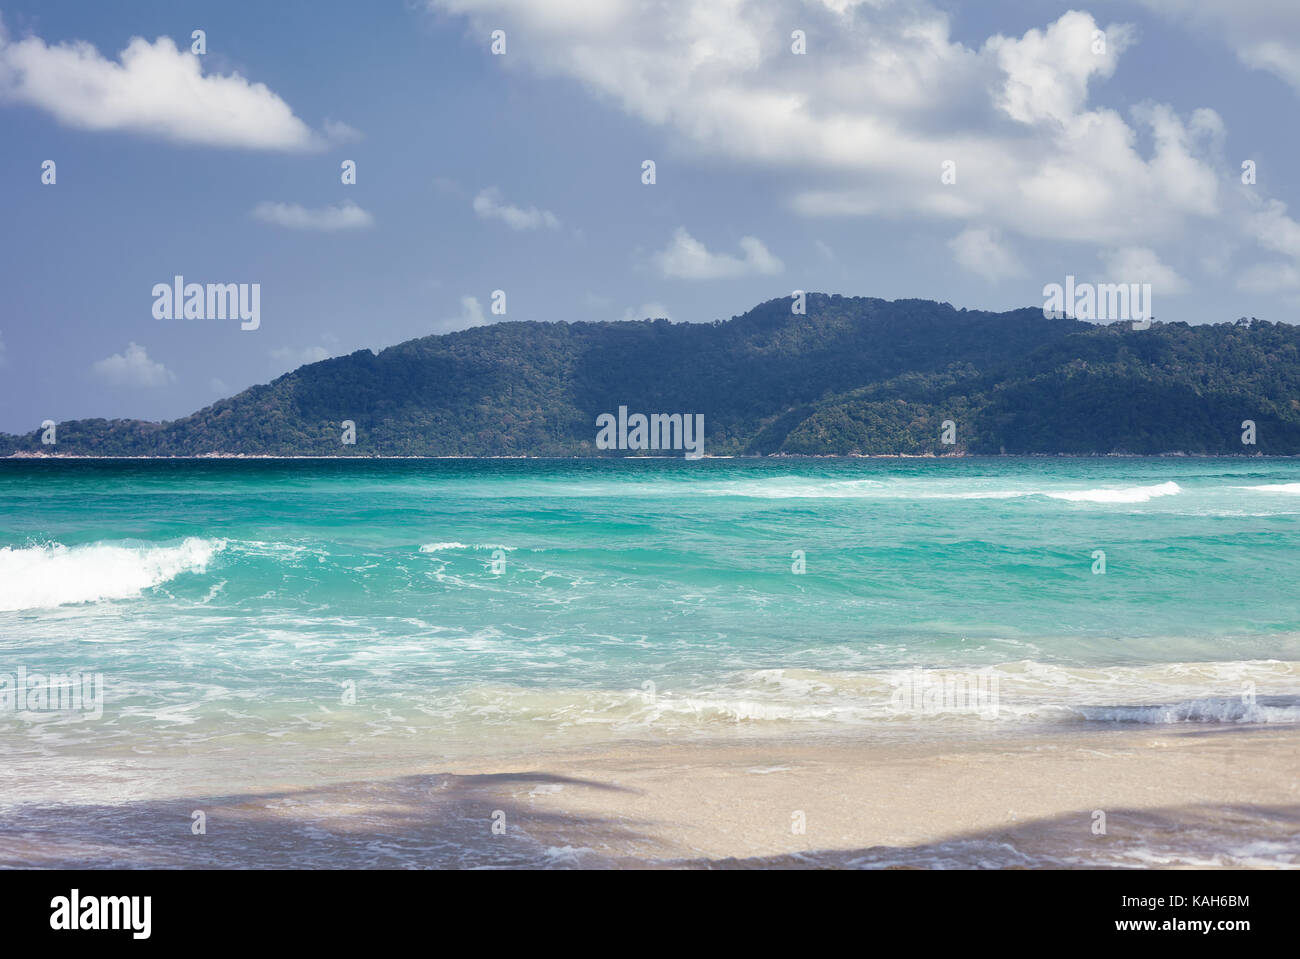 Untouched tropical beach and sea on a sunny summer day. Perhentian island, Malaysia. Stock Photo